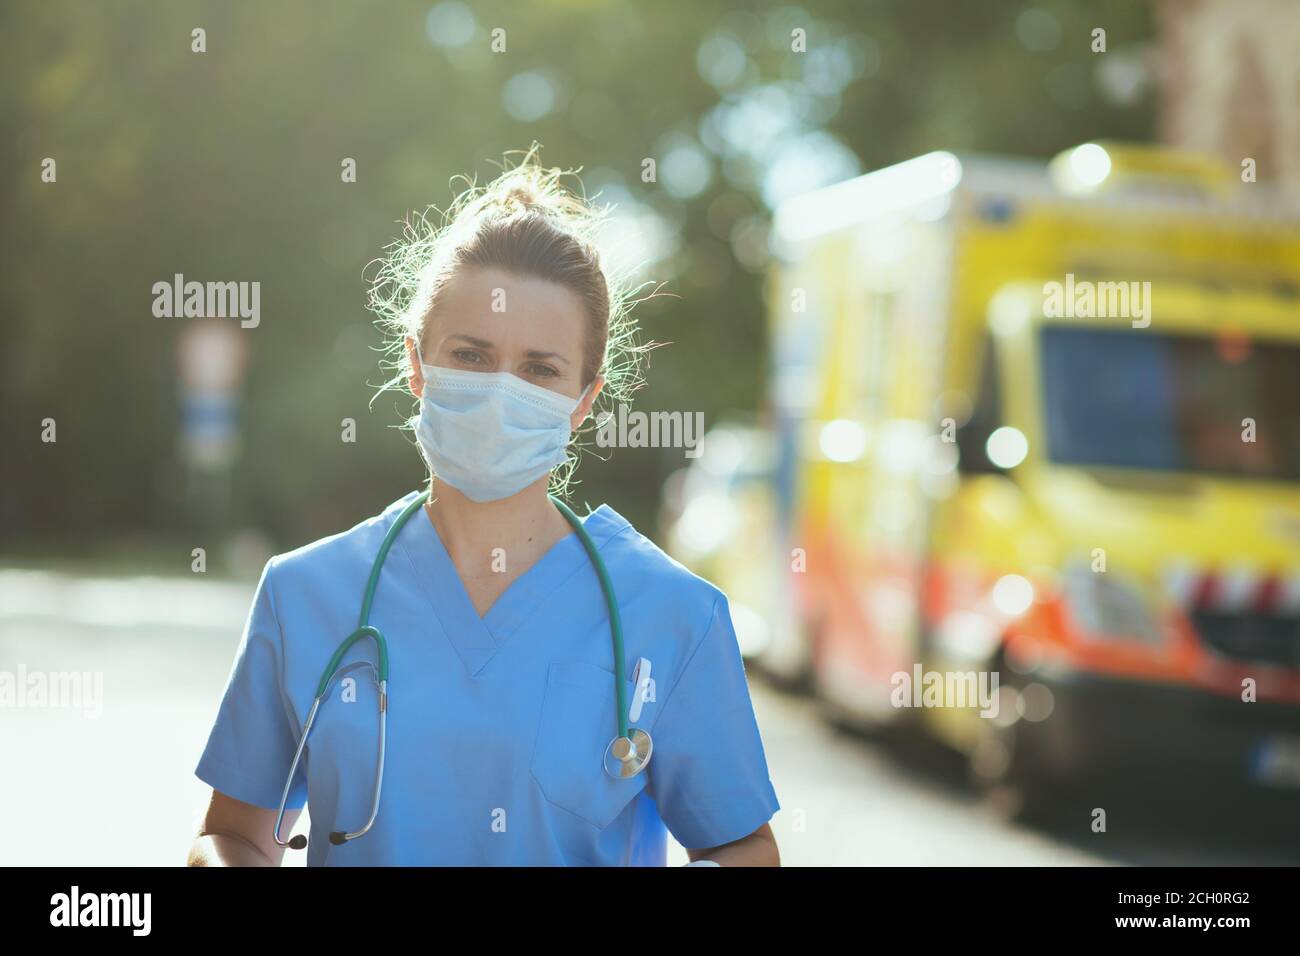 covid-19 pandemic. Portrait of modern paramedic woman in scrubs with stethoscope and medical mask outdoors near ambulance. Stock Photo